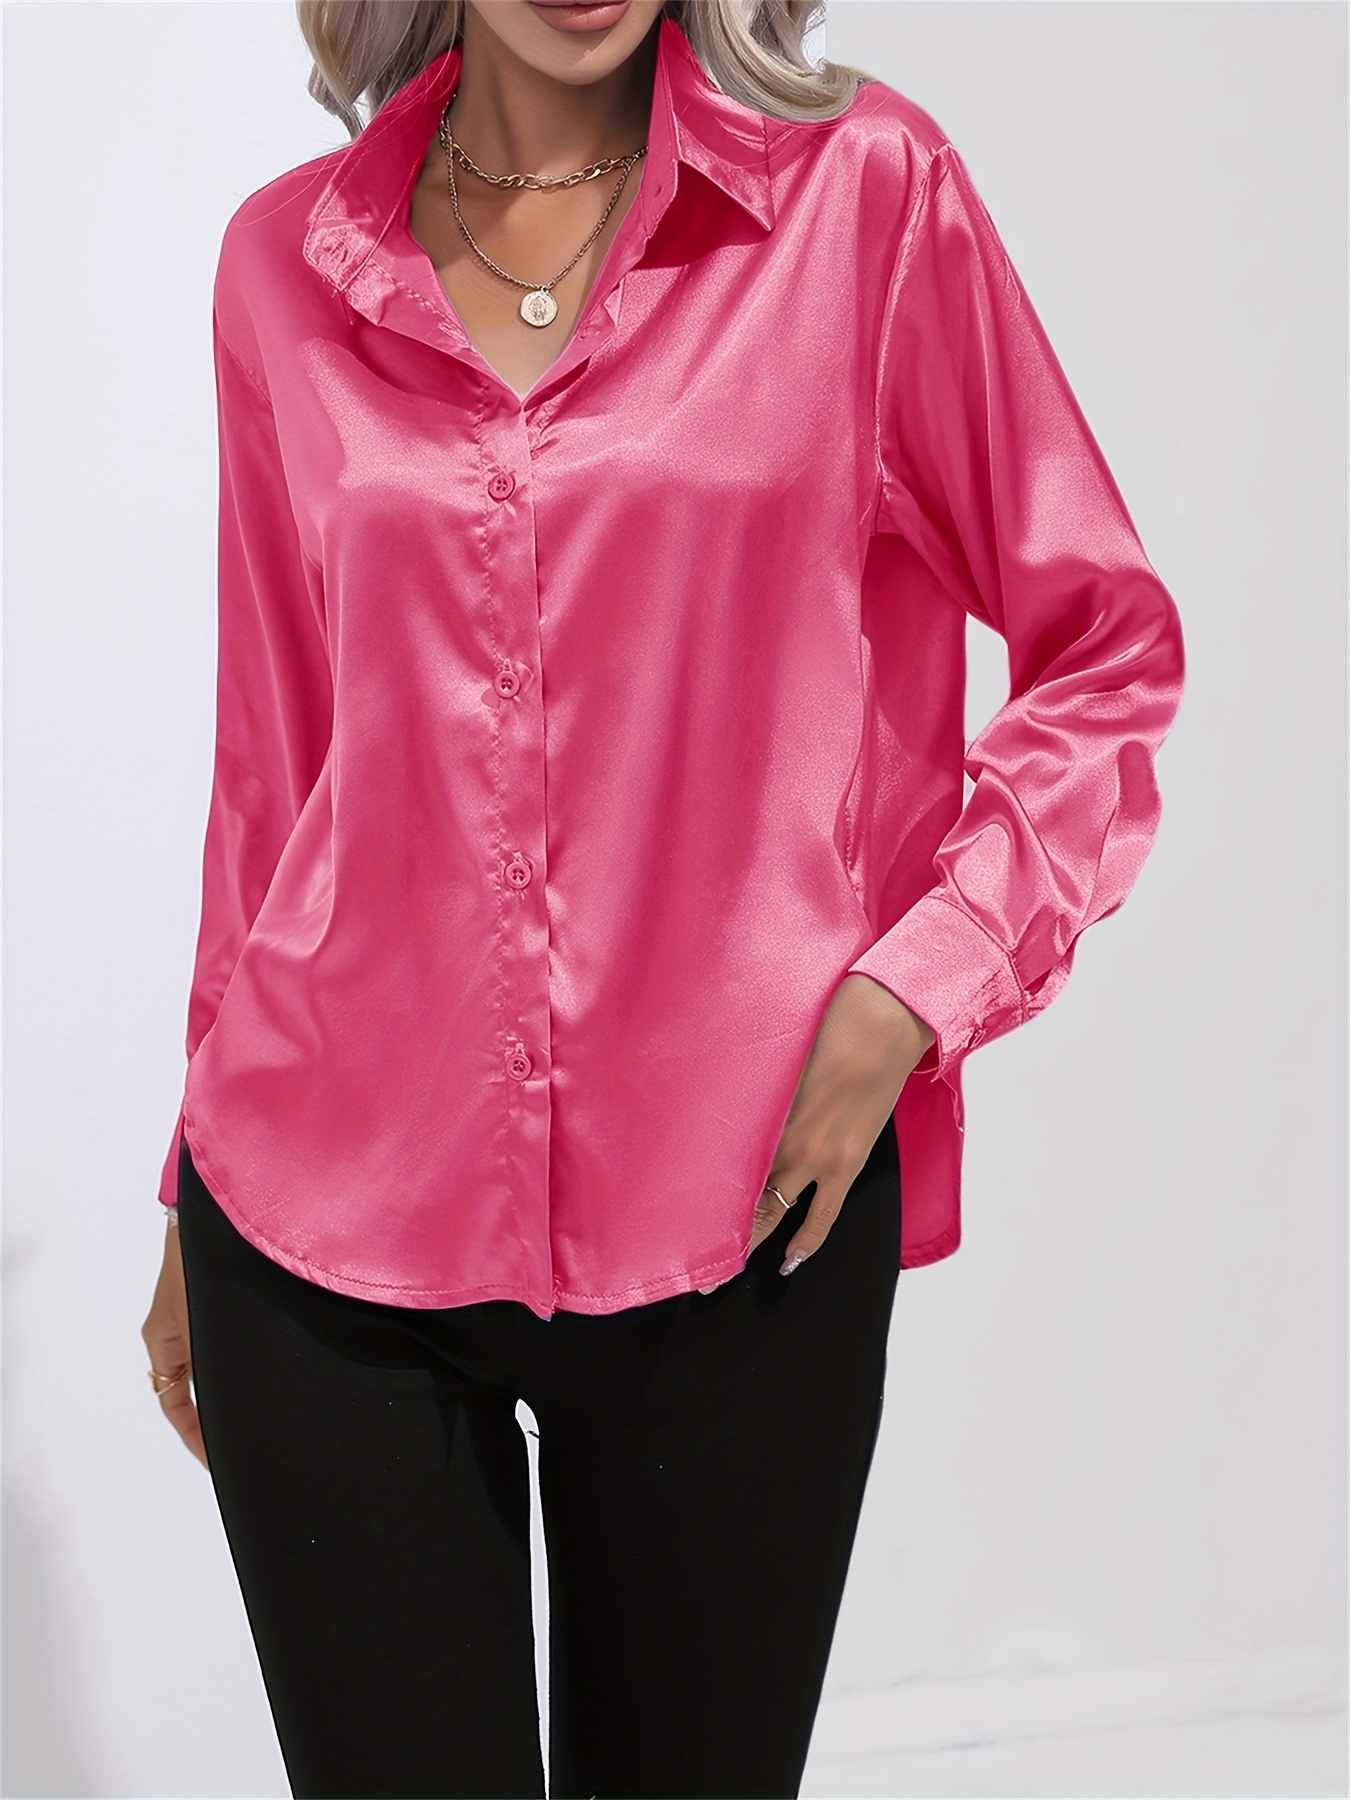 solid smoothly shirt, solid smoothly shirt elegant button front turn down collar long sleeve shirt womens clothing details 95